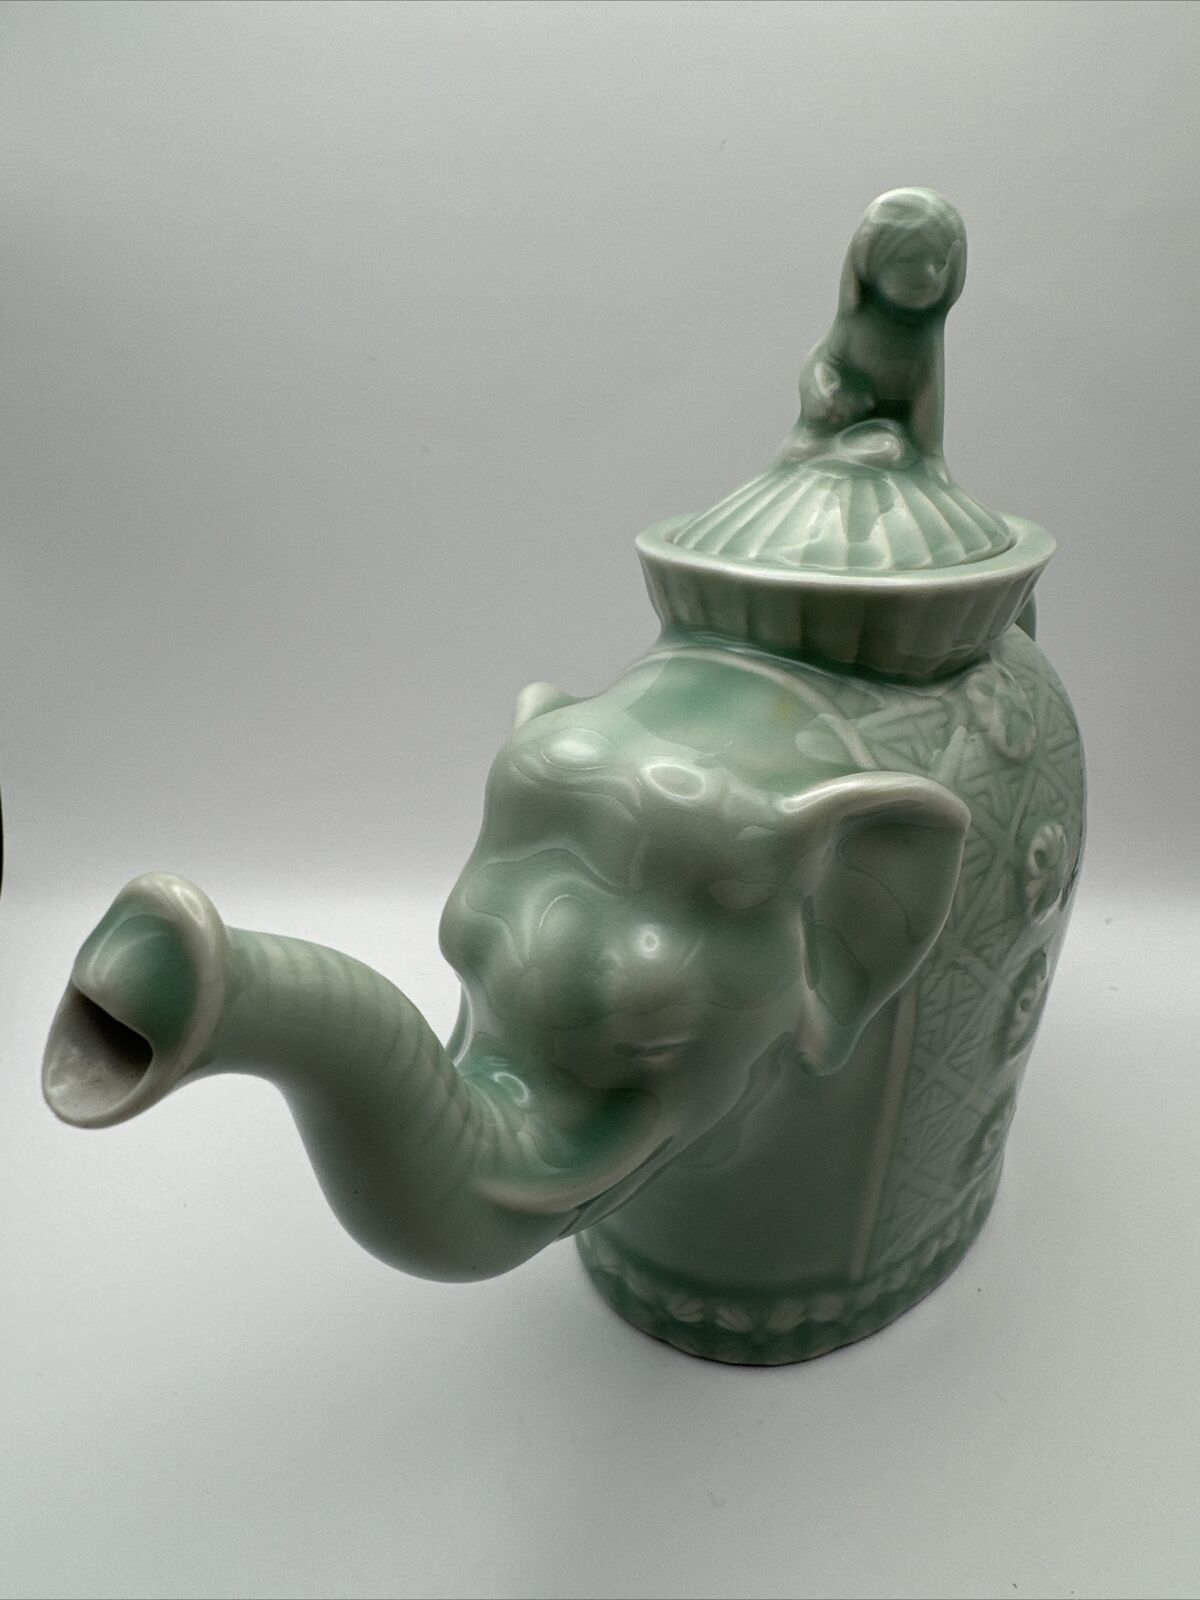 Teapot Green Elephant Rider Marked Bottom Chinese Porcelain Vintage 7.5” H 10”W